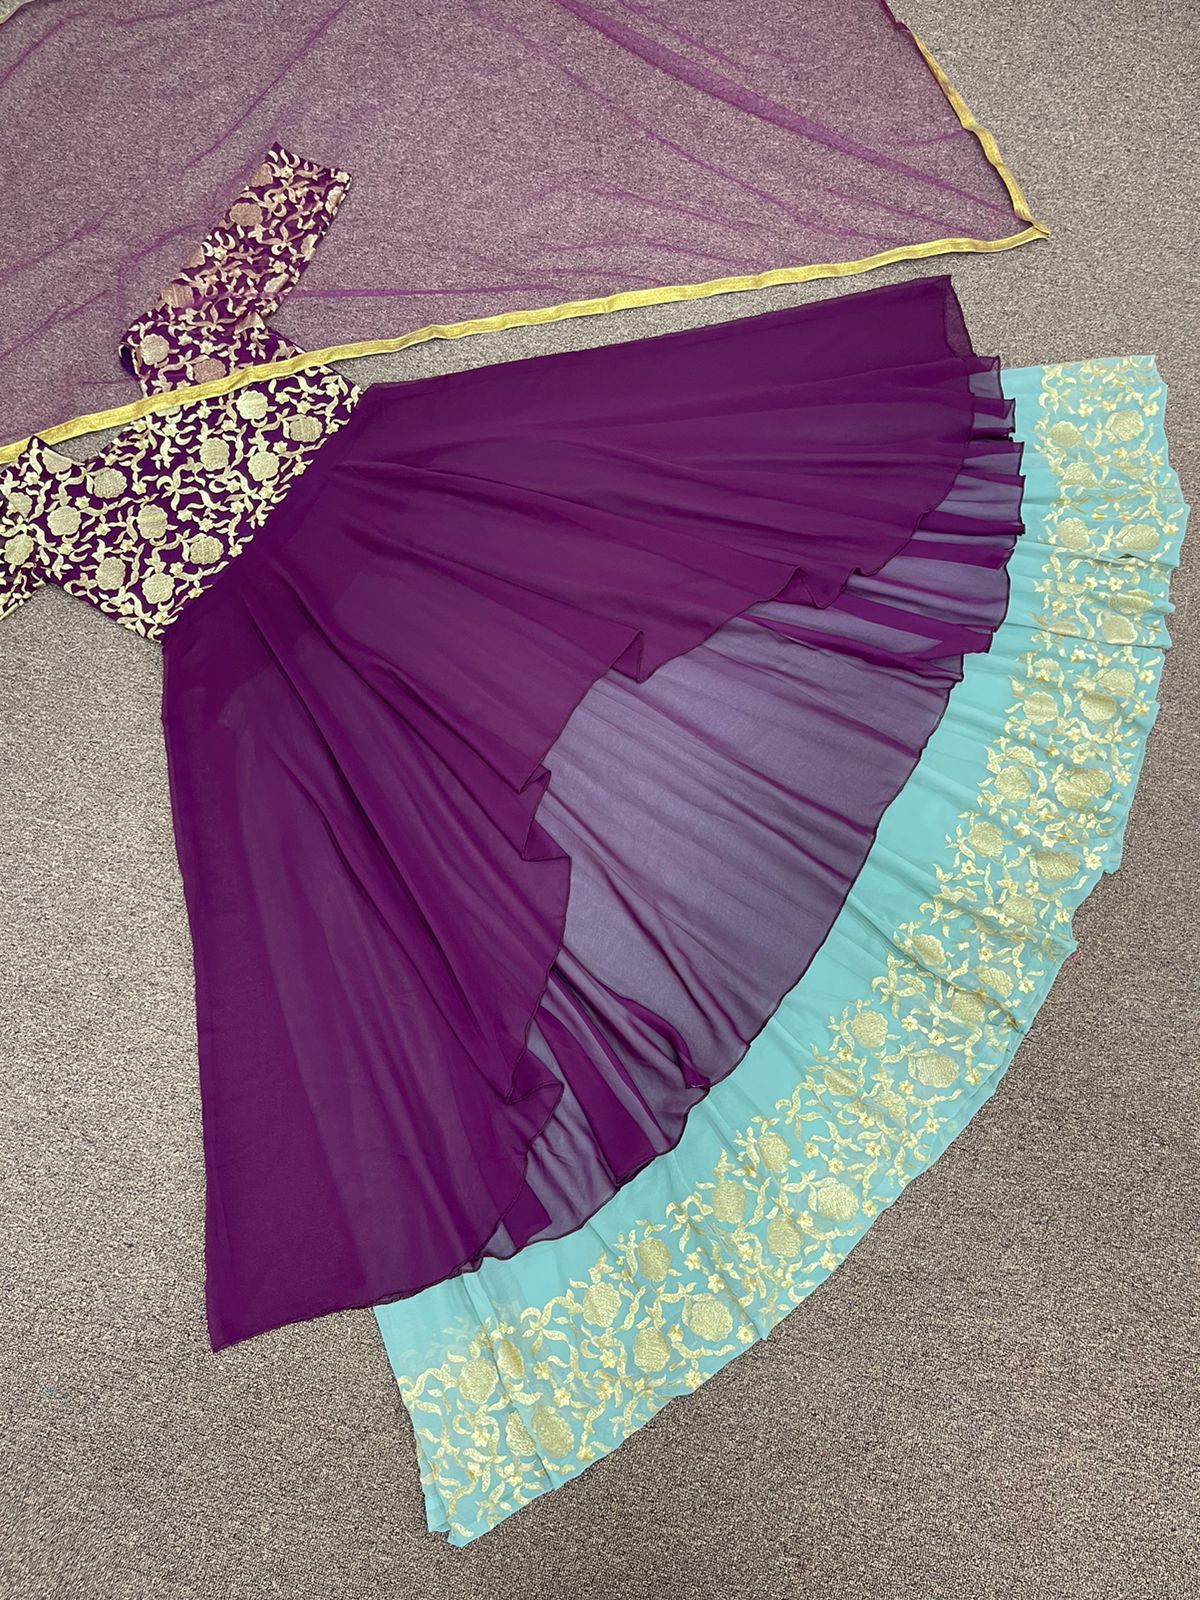 Western Top Lehenga with Embroidery